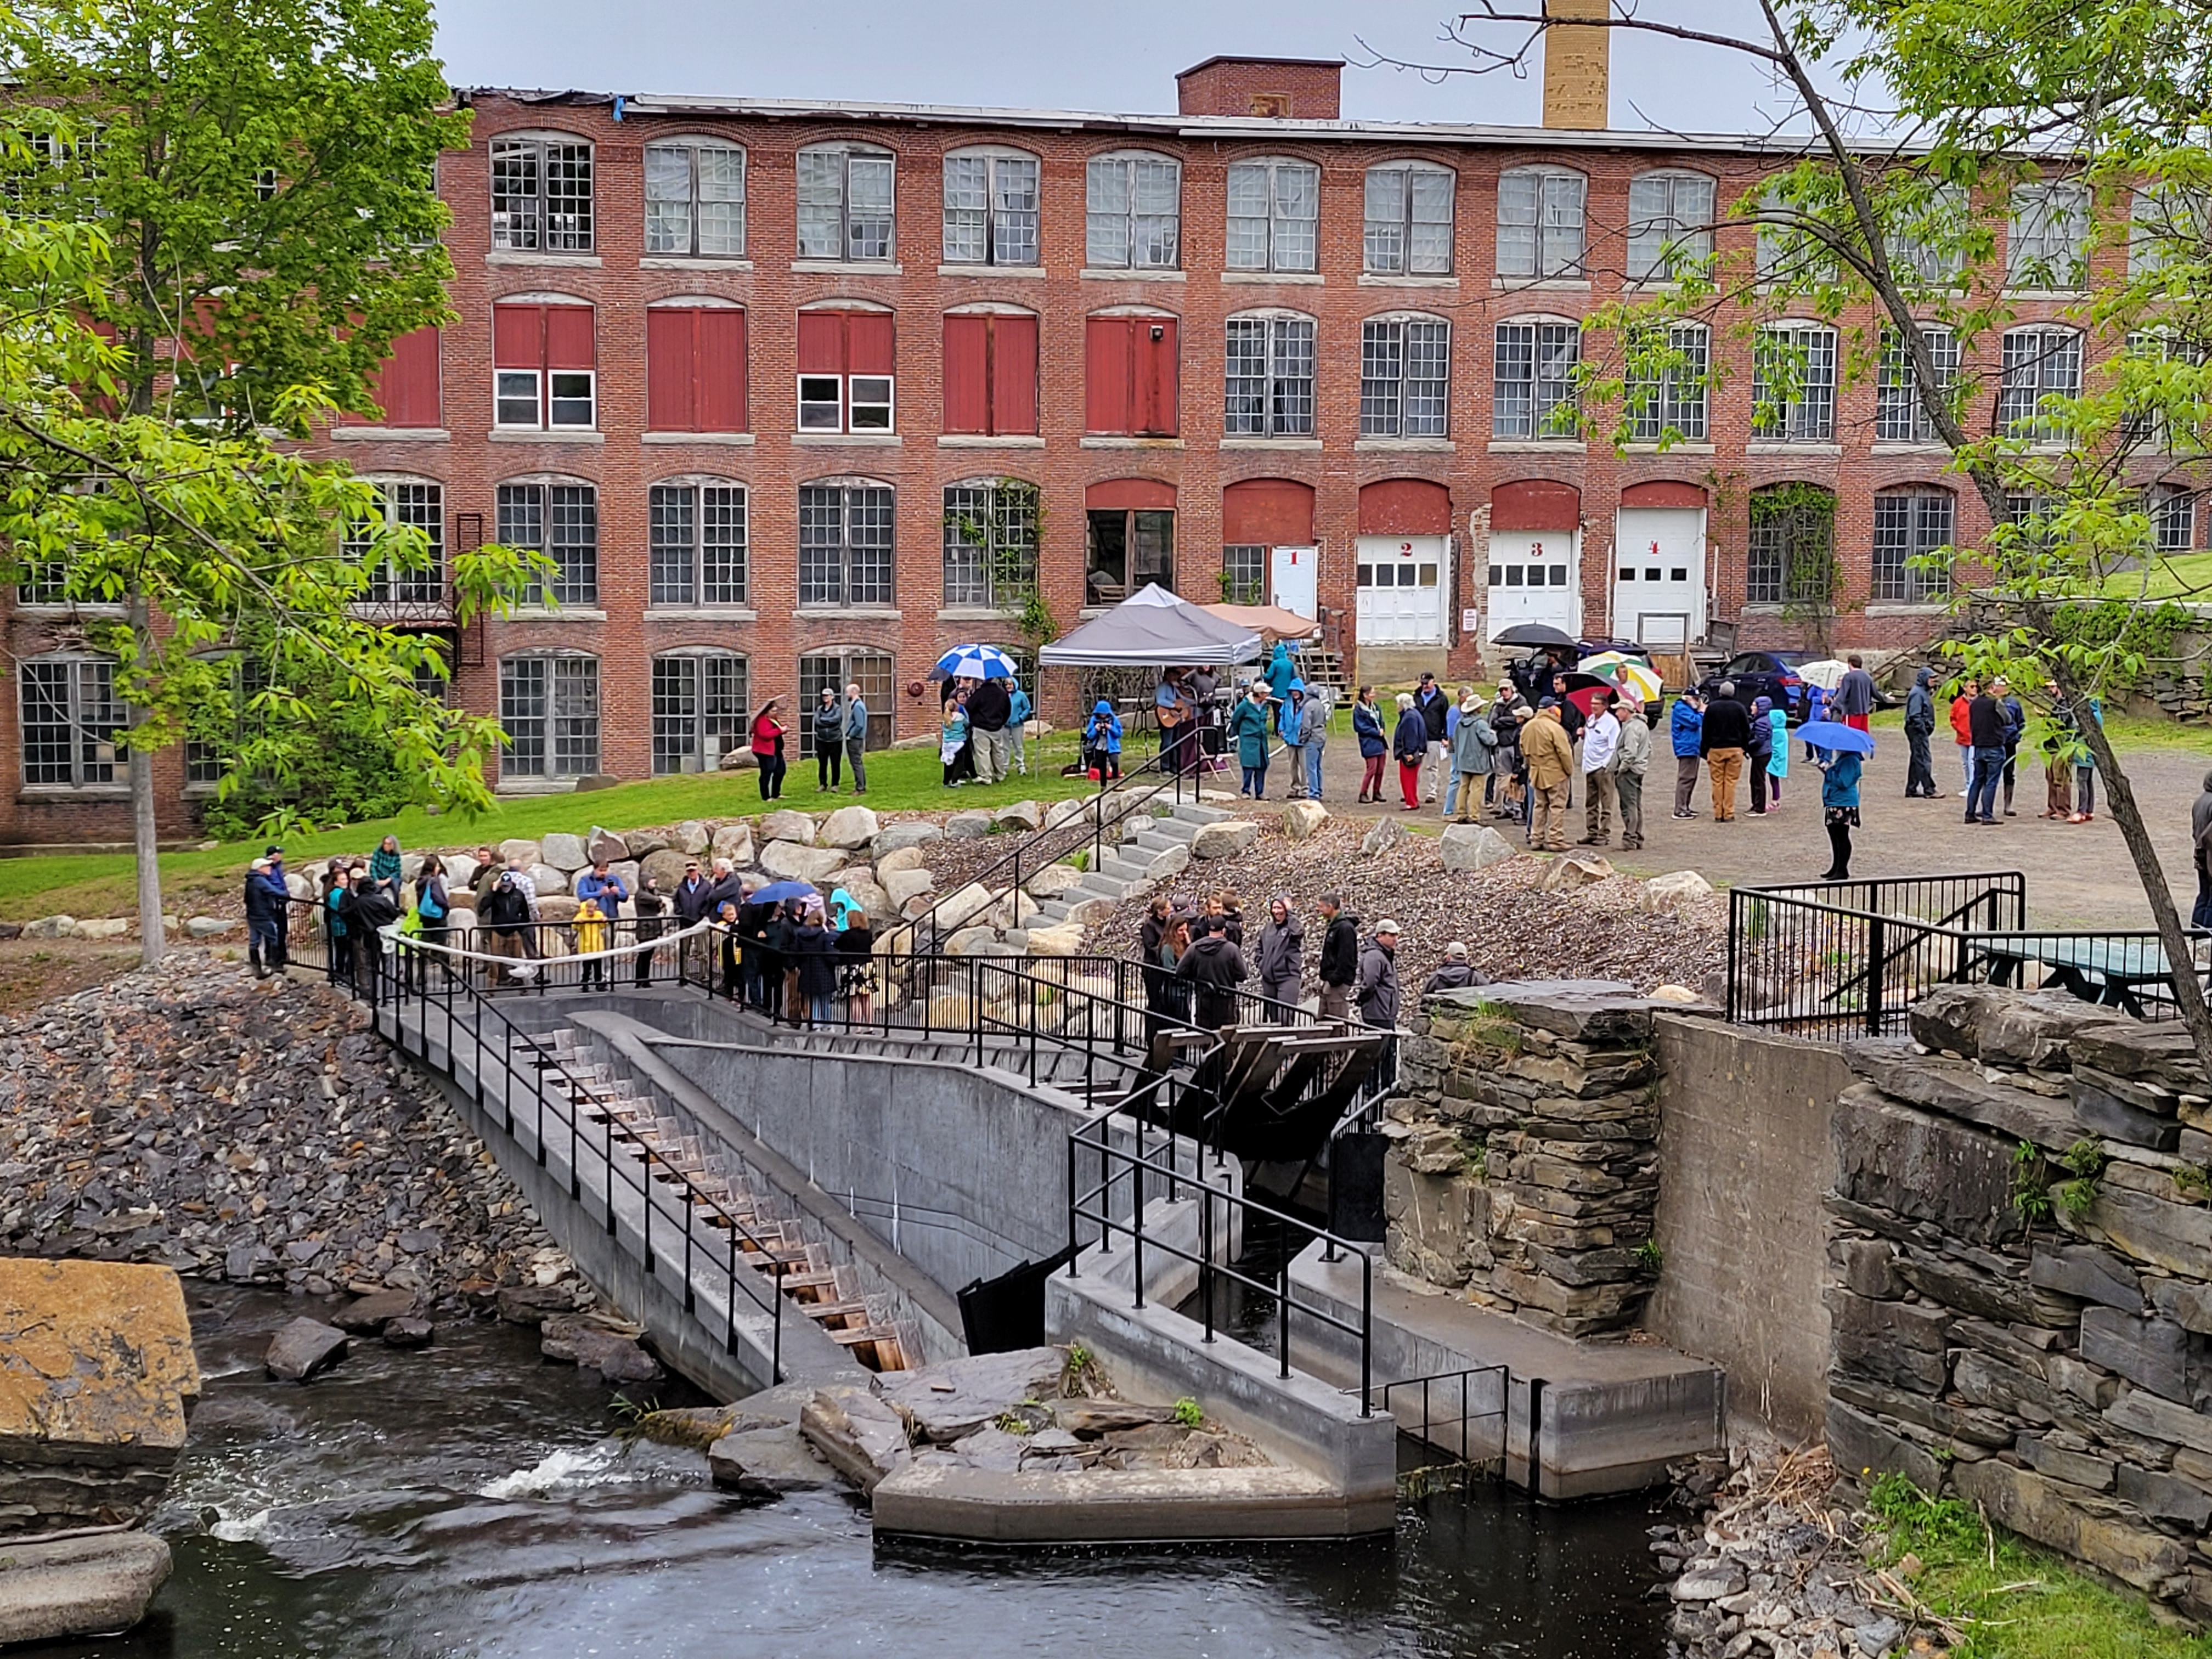 People gather around a fishway structure before a large, old mill building